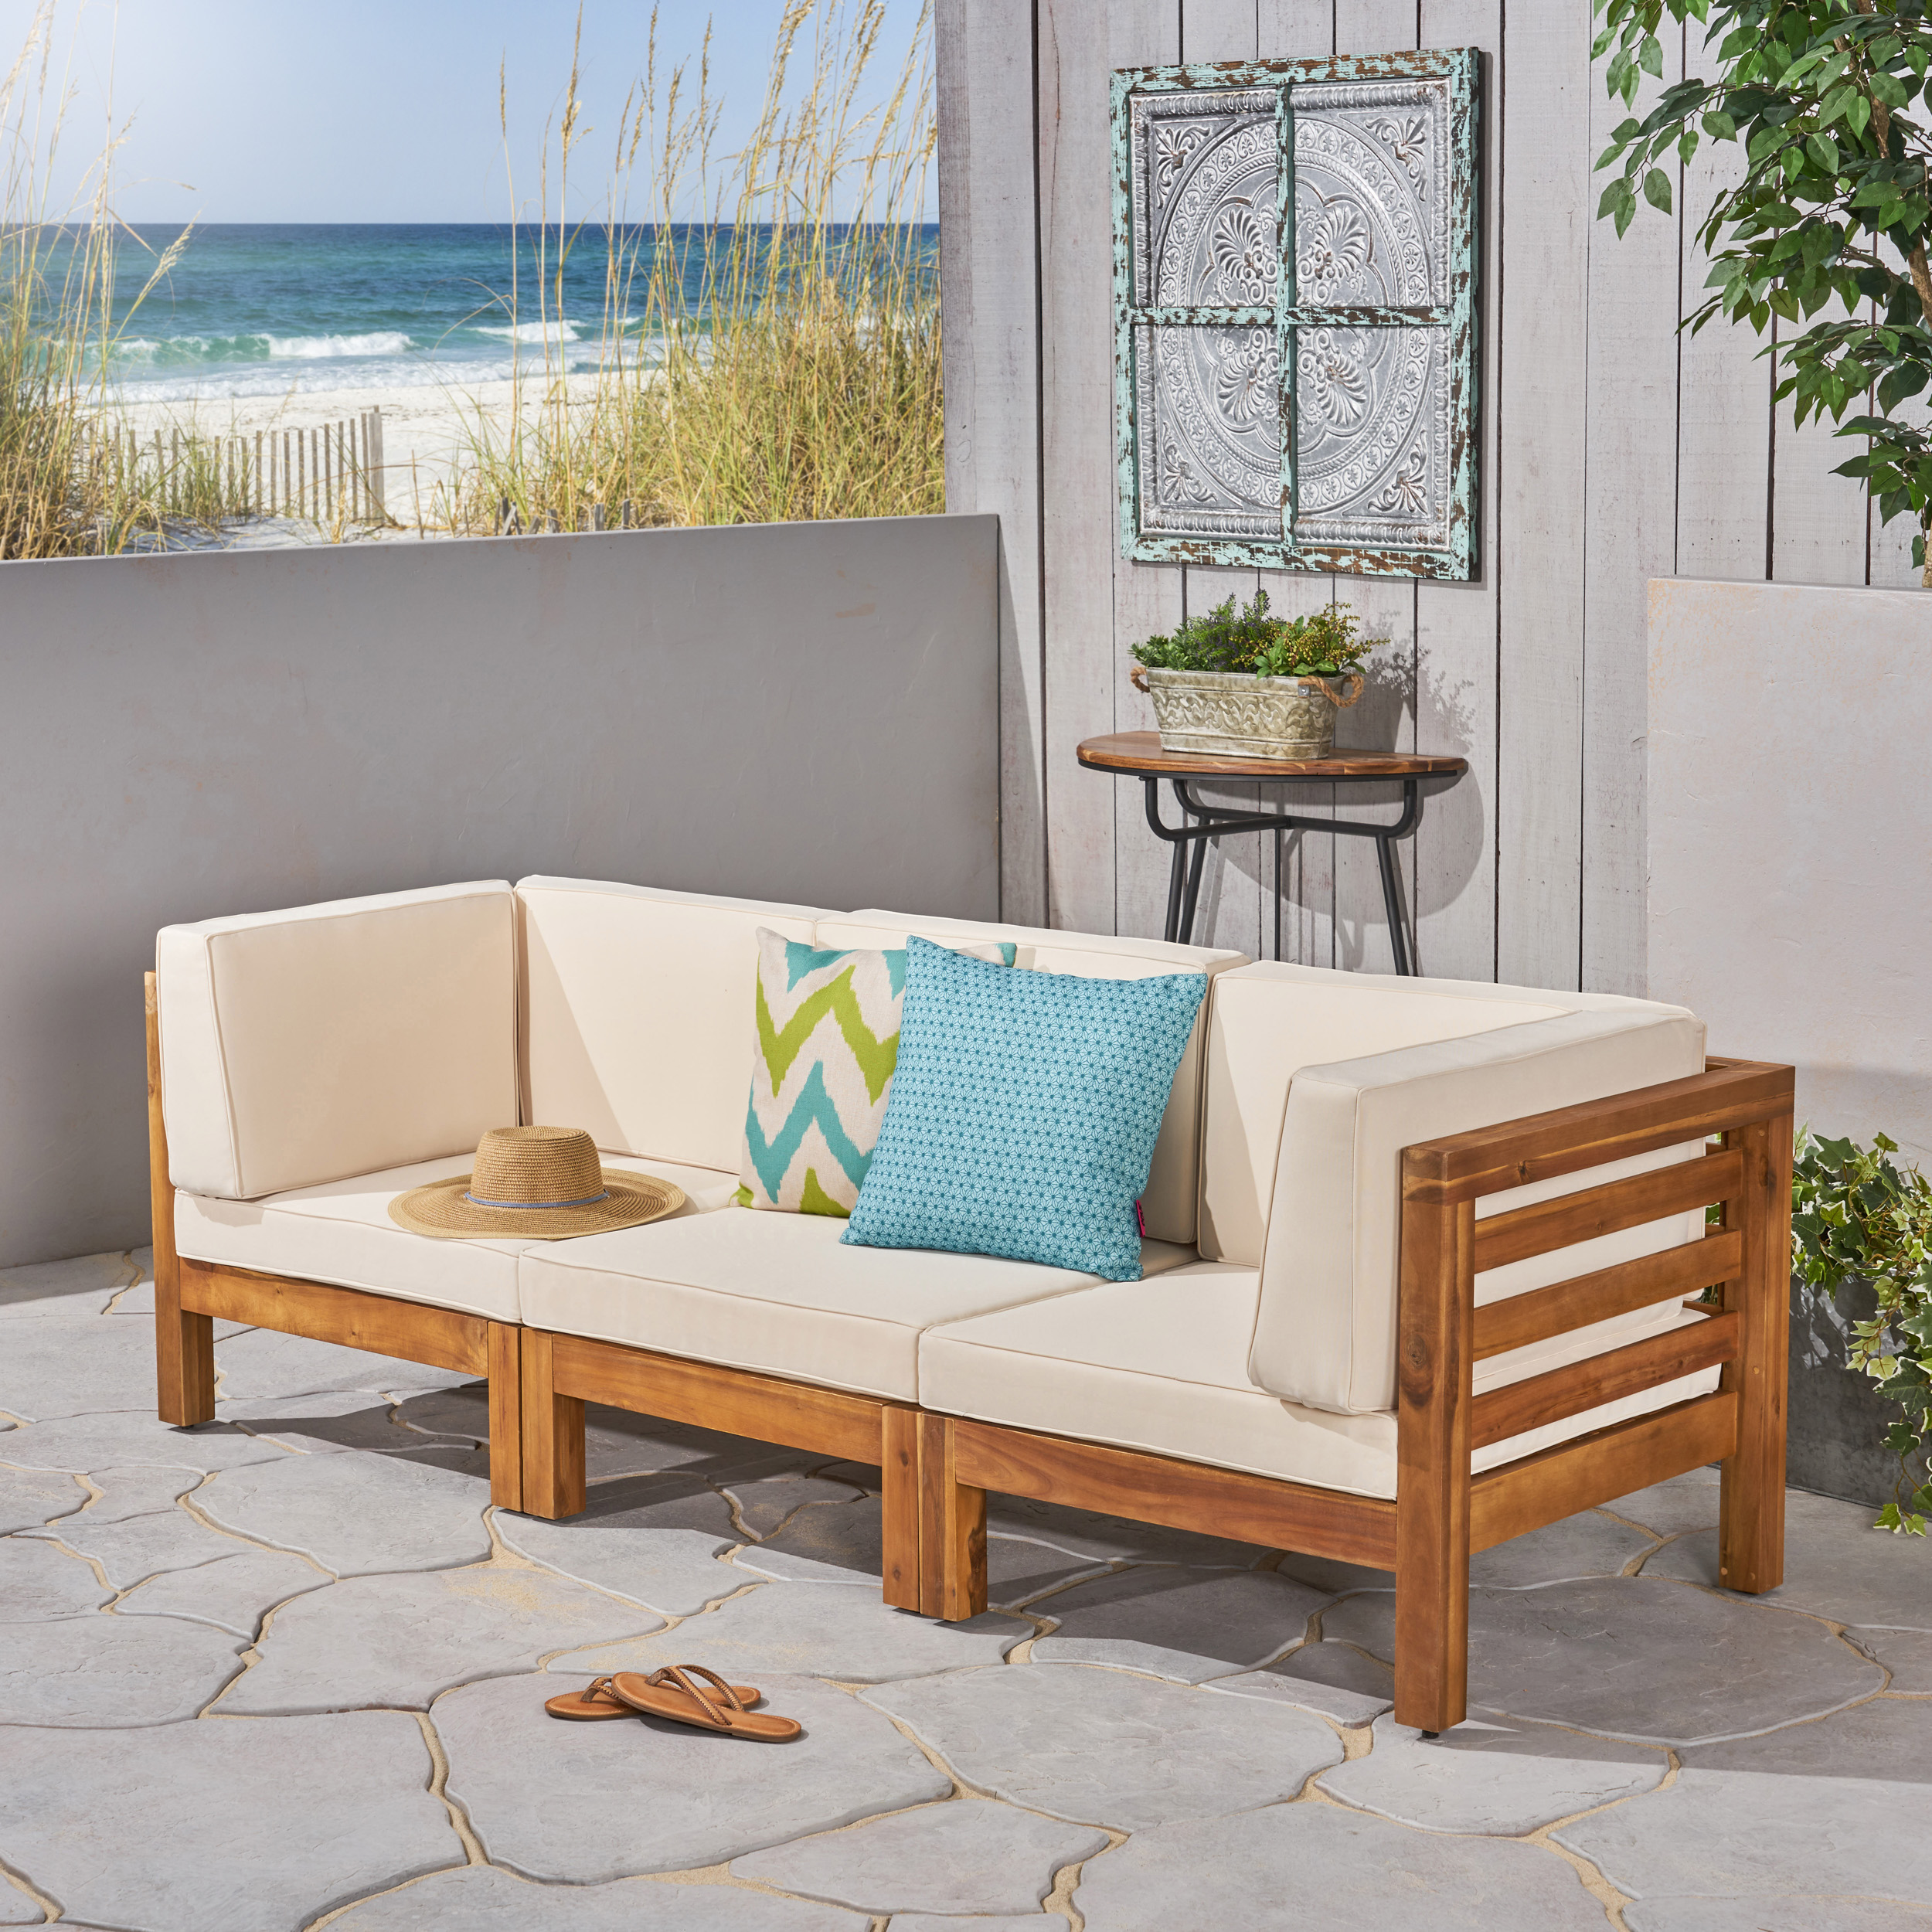 Frankie Outdoor Acacia Wood Sectional Sofa with Cushions, Teak, Beige